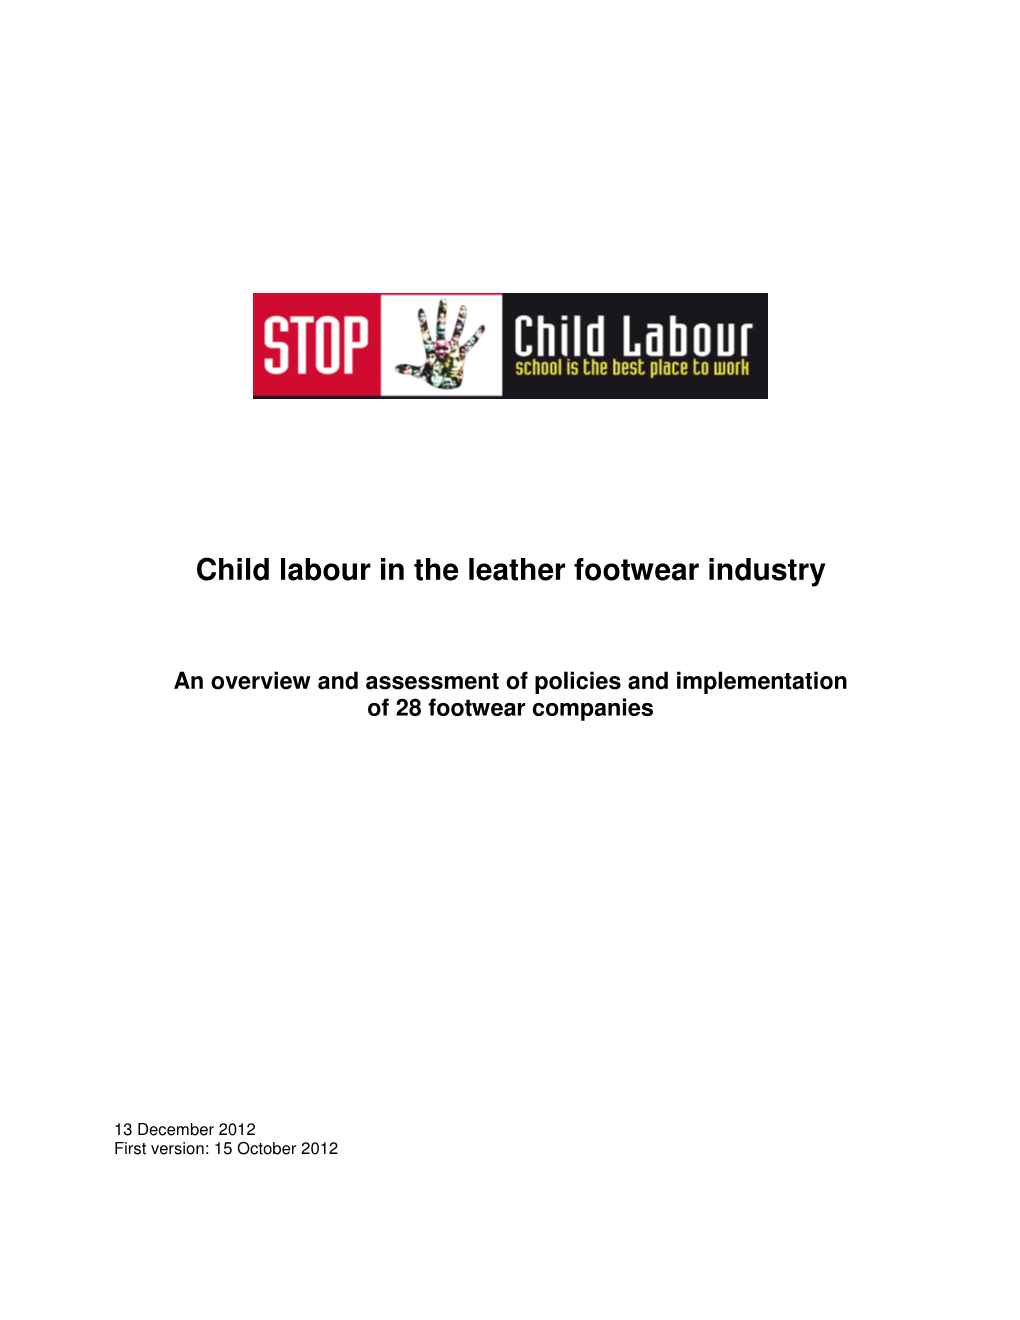 Child Labour in the Leather Footwear Industry